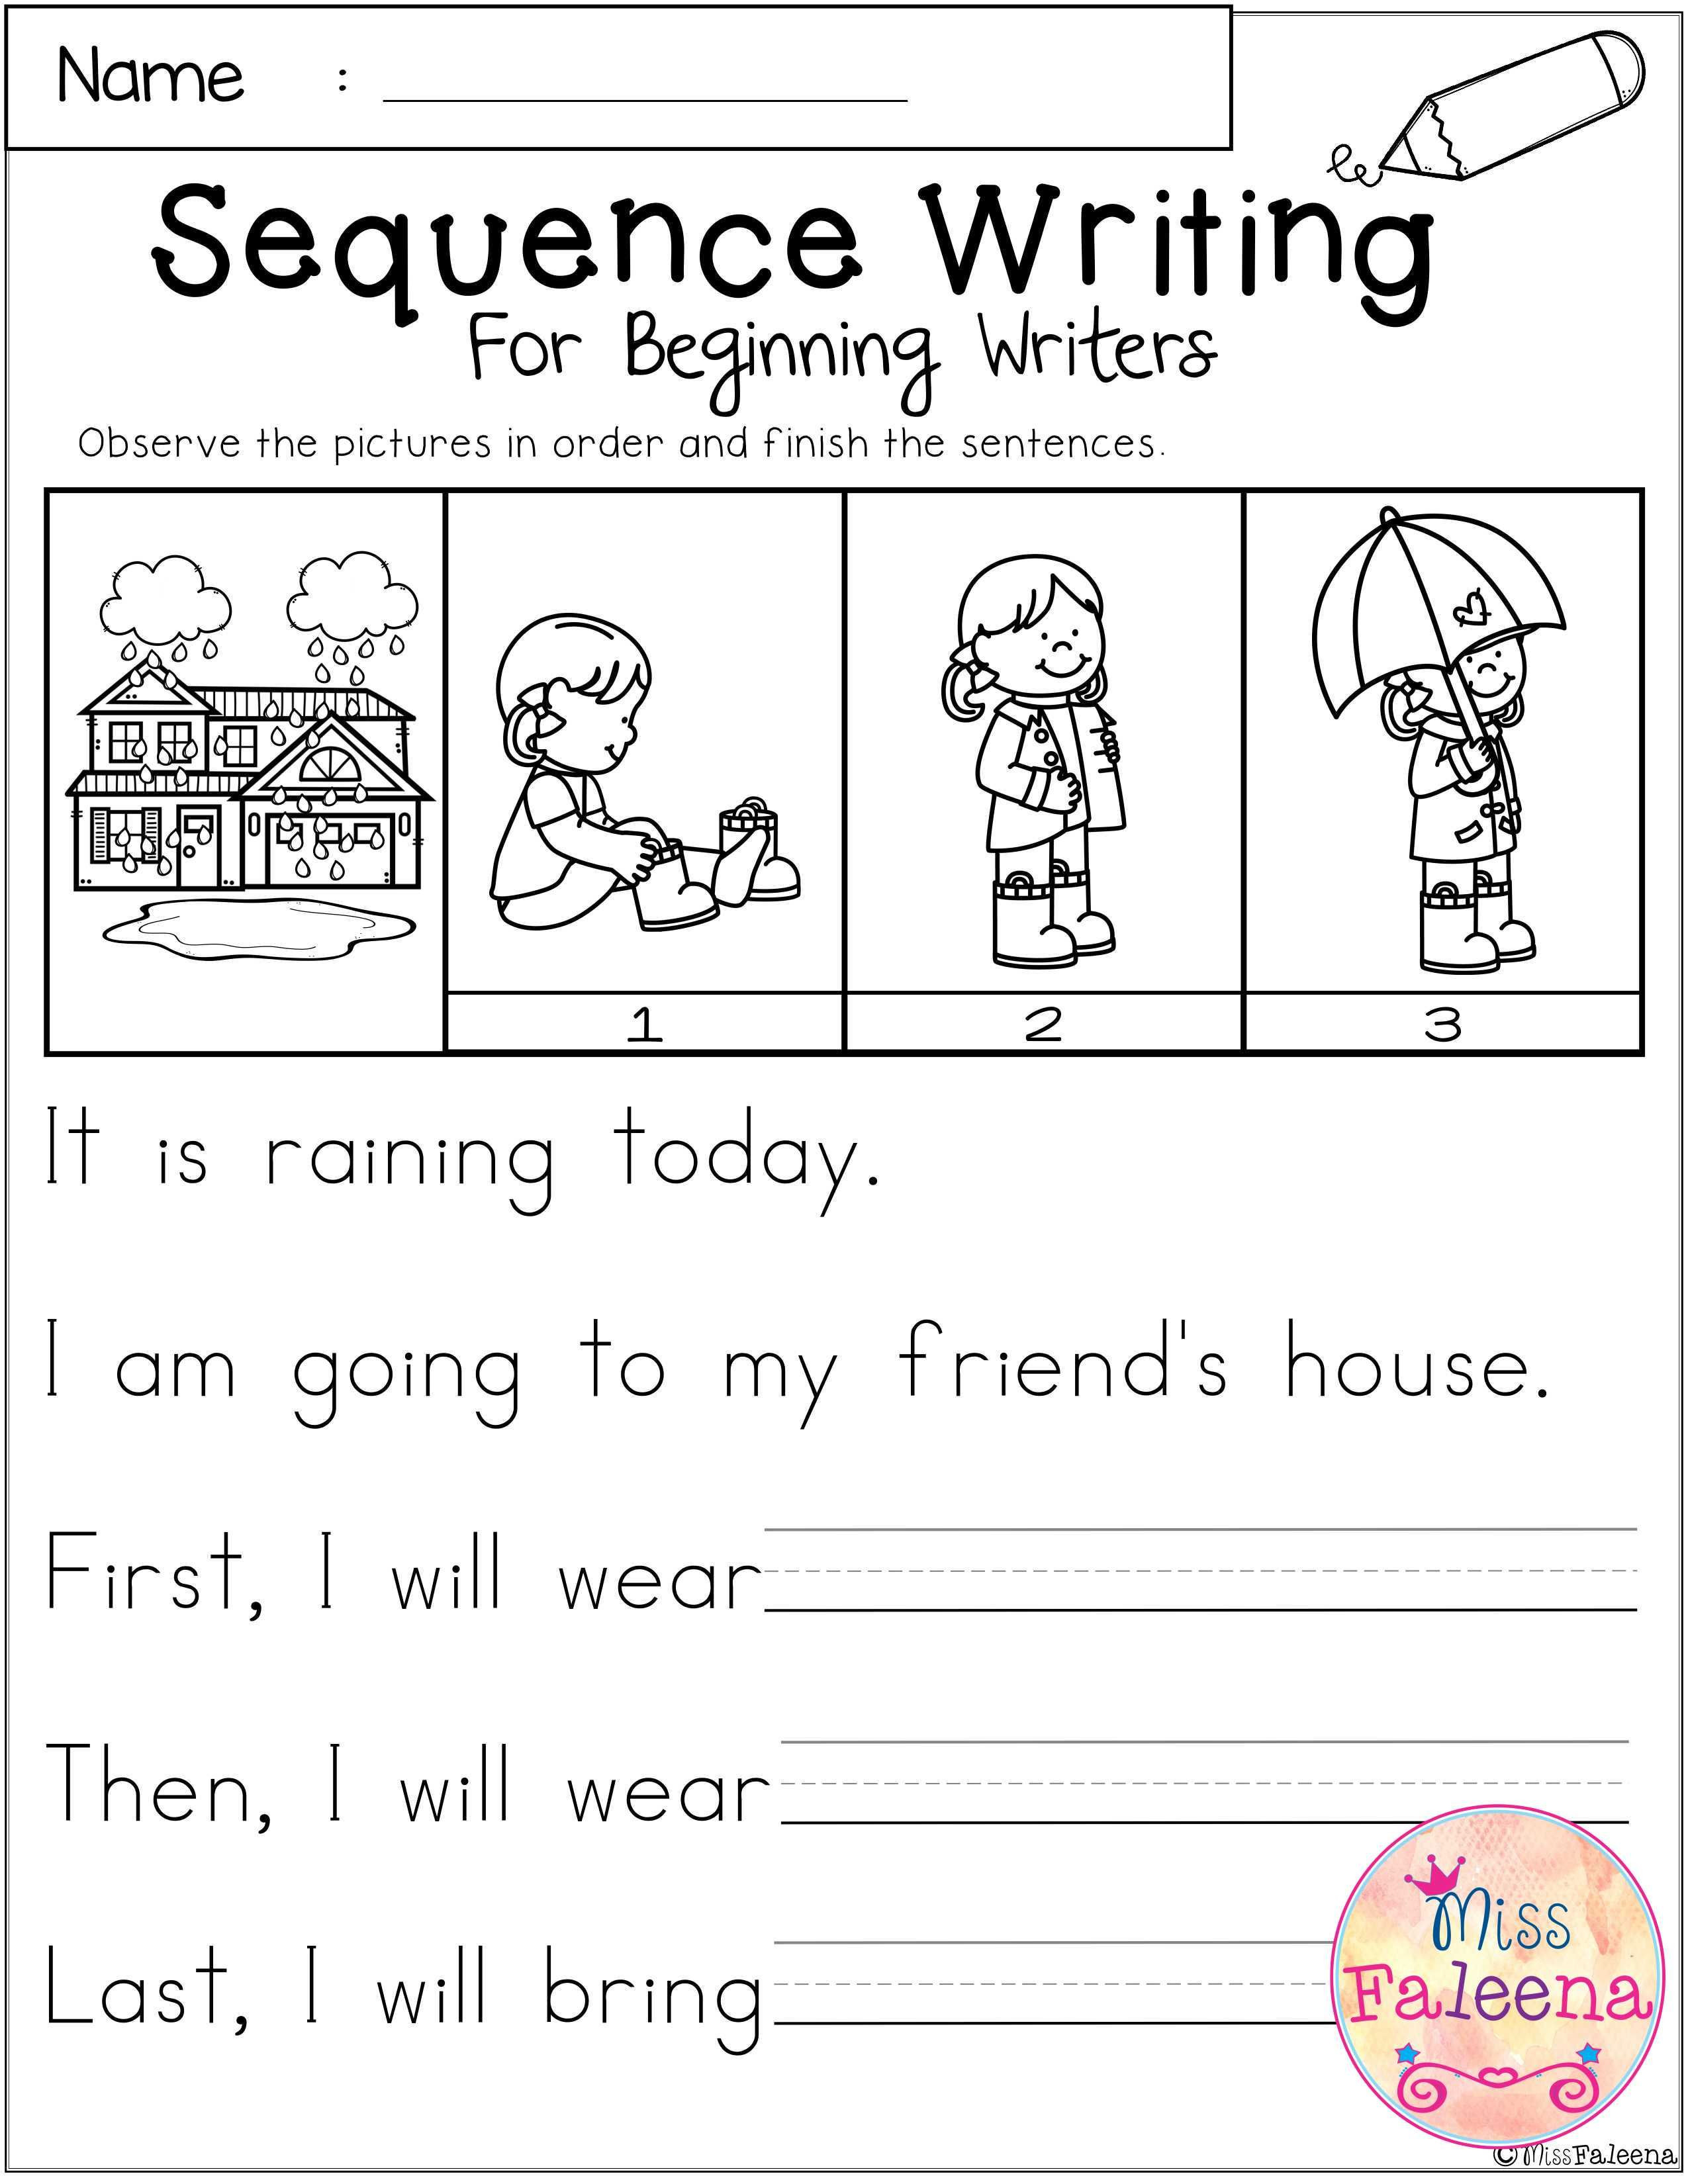 Sequencing Worksheets Kindergarten March Sequence Writing for Beginning Writers